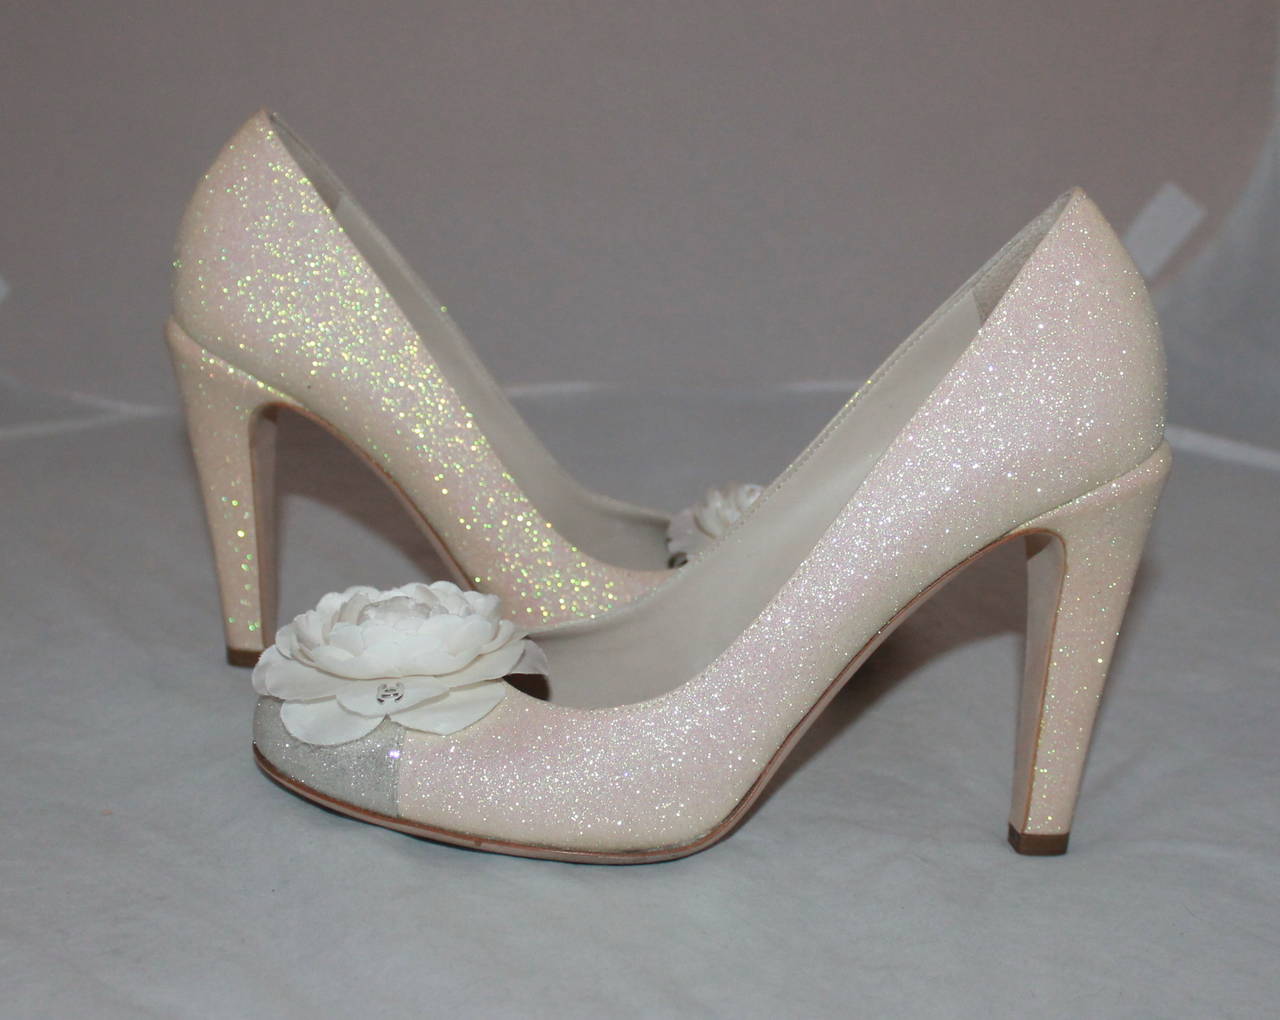 Chanel Ivory & Silver Glitter Pumps with Front Camellia - 40. These shoes are in excellent condition and have a silver toe with an ivory body. The camellia has a silver 